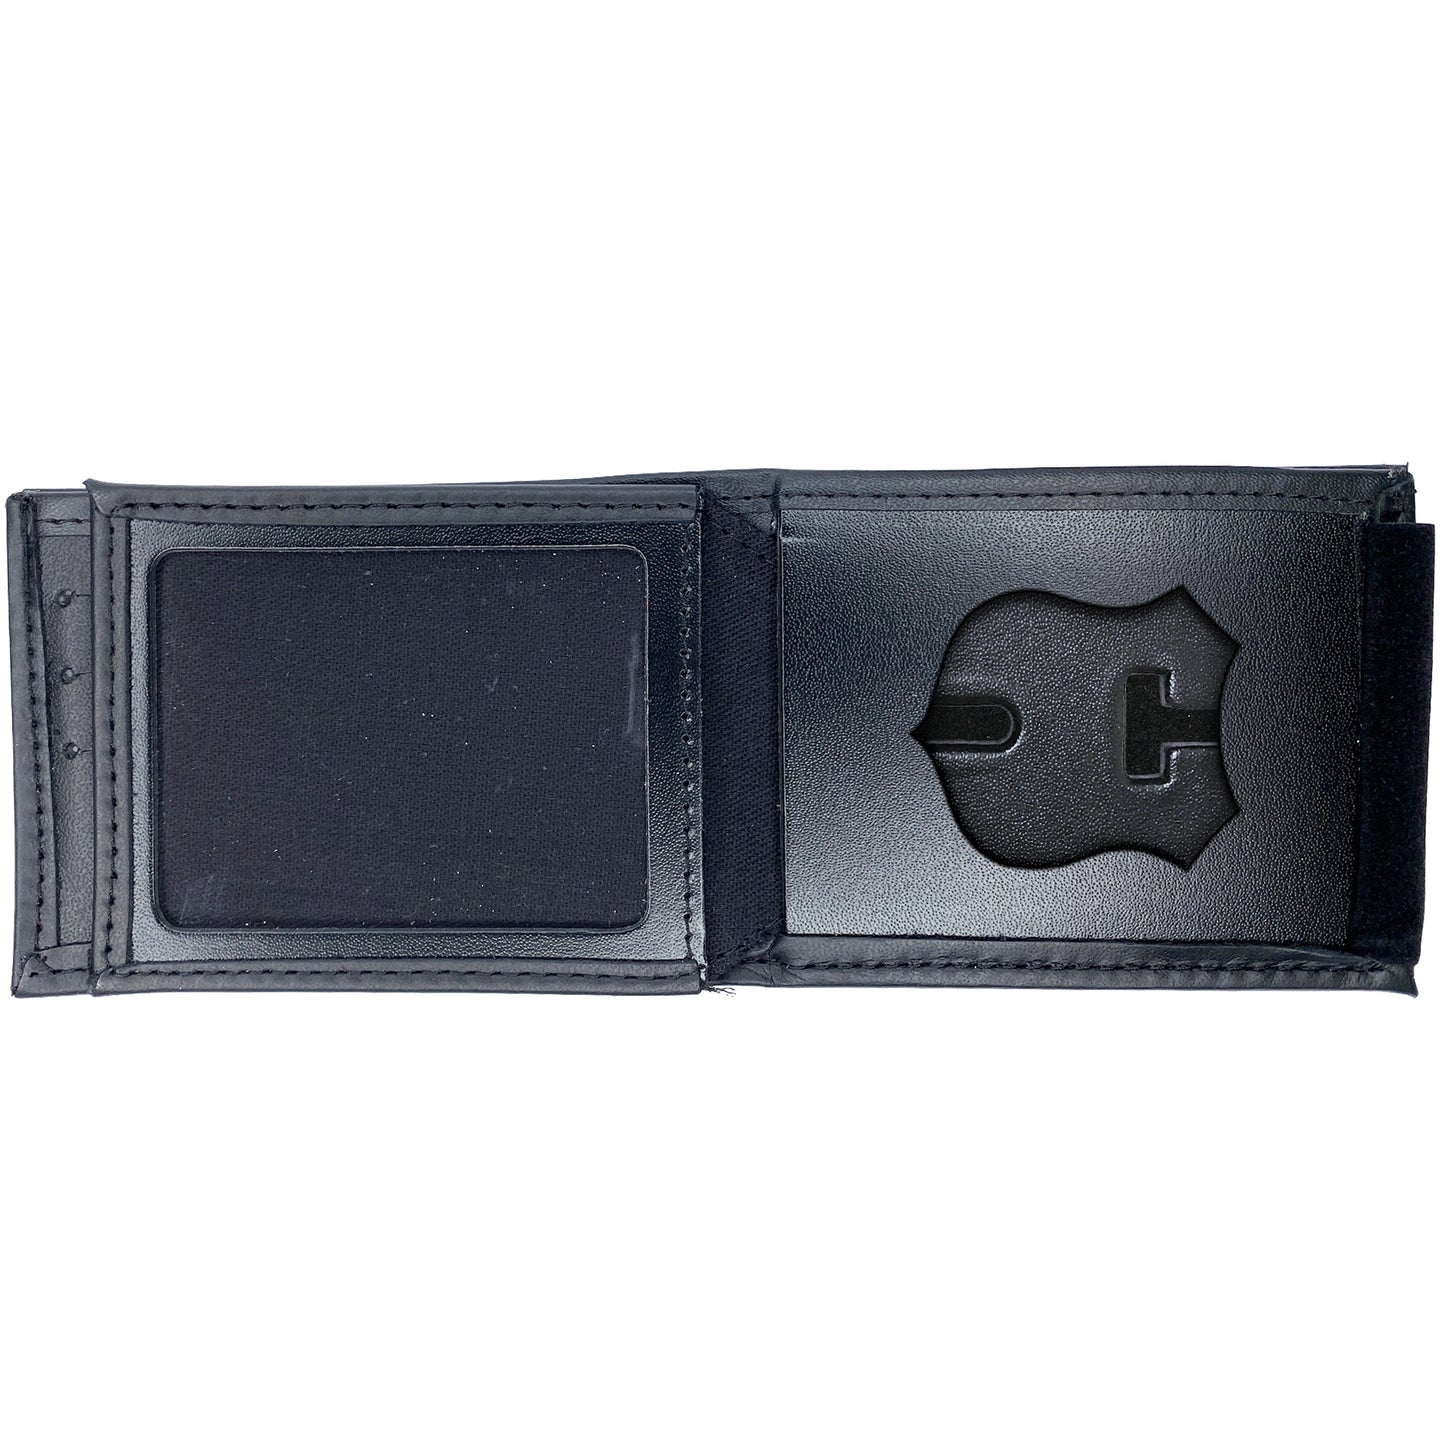 Ontario Conservation Officer Hidden Badge Wallet-Perfect Fit-911 Duty Gear Canada